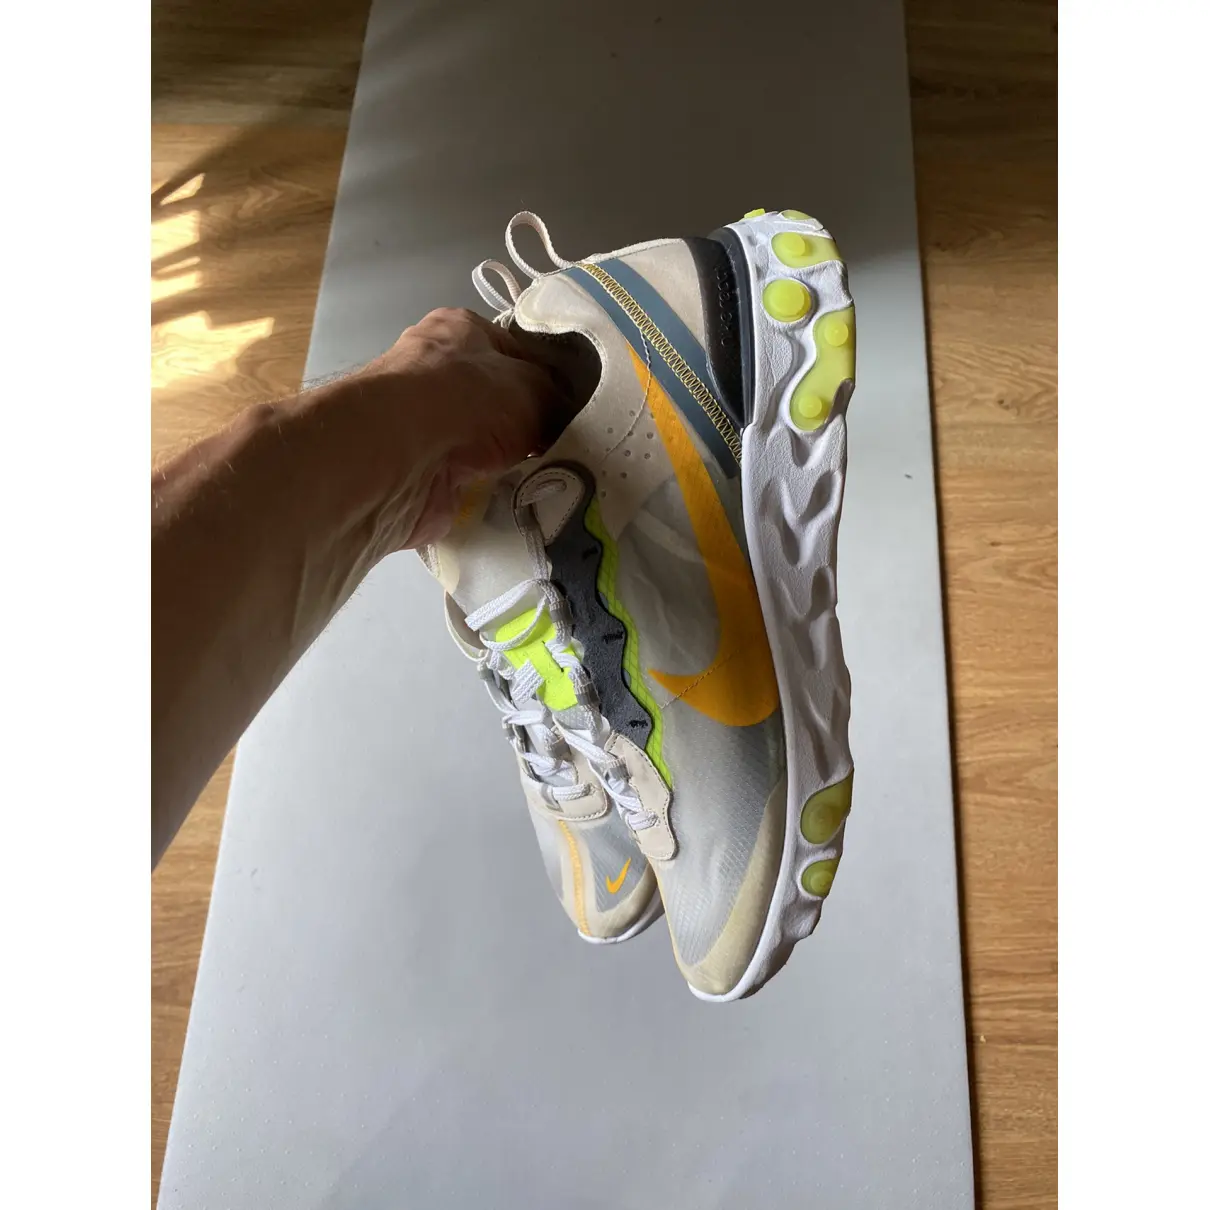 Buy Nike React Element 87 low trainers online